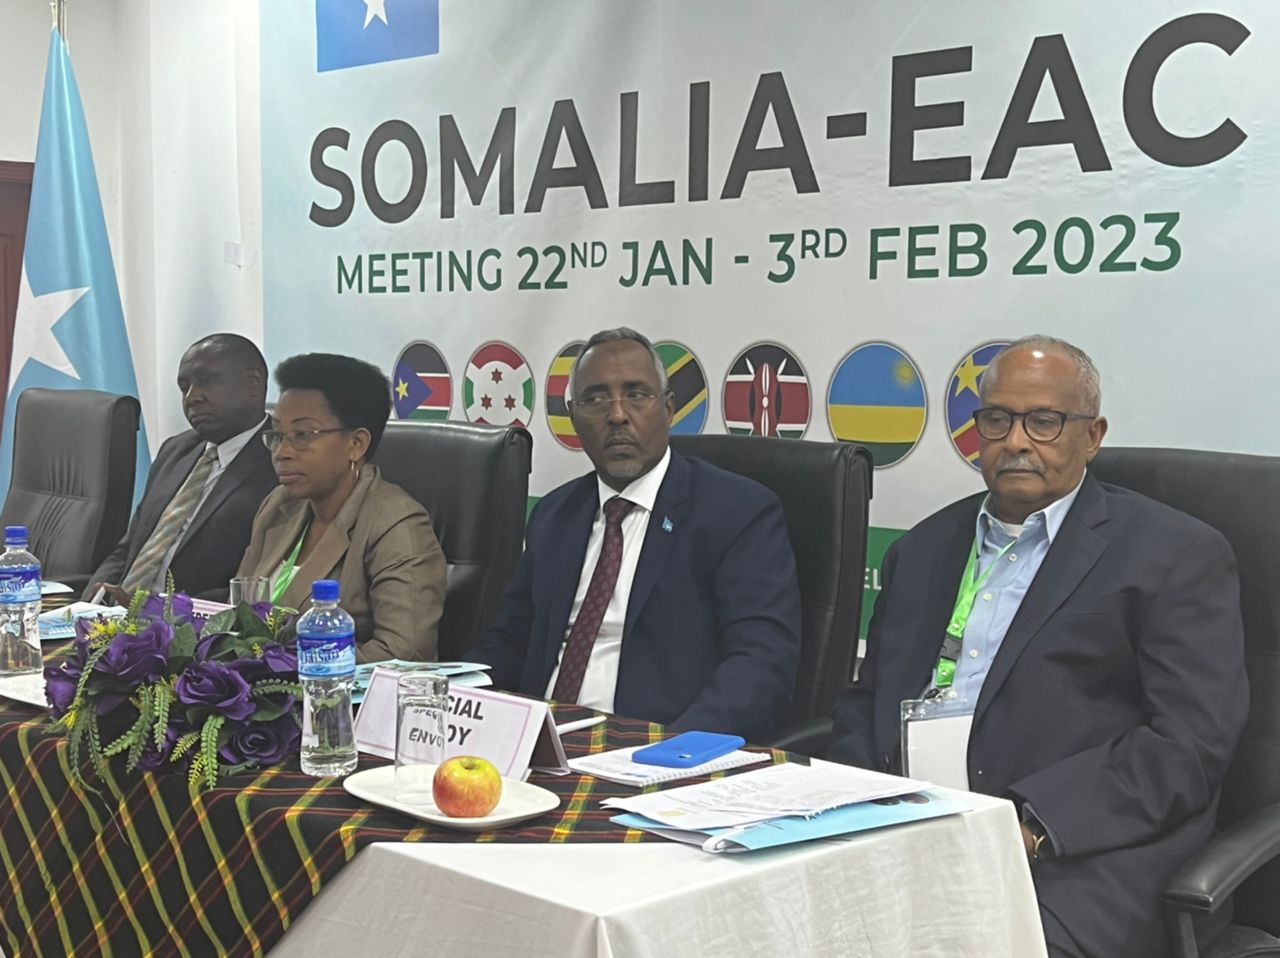 (L-R) The Council to the Community, Dr. Anthony Kafumbe, the Chairperson of the Verification Mission, Mrs. Tiri Marie Rose, Somalia’s Minister of Foreign Affairs and International Cooperation, Hon. Abshir Omar, and the Special Envoy of the President of Somalia to EAC, H.E. Abdulsalam Omer in Mogadishu, Somalia.